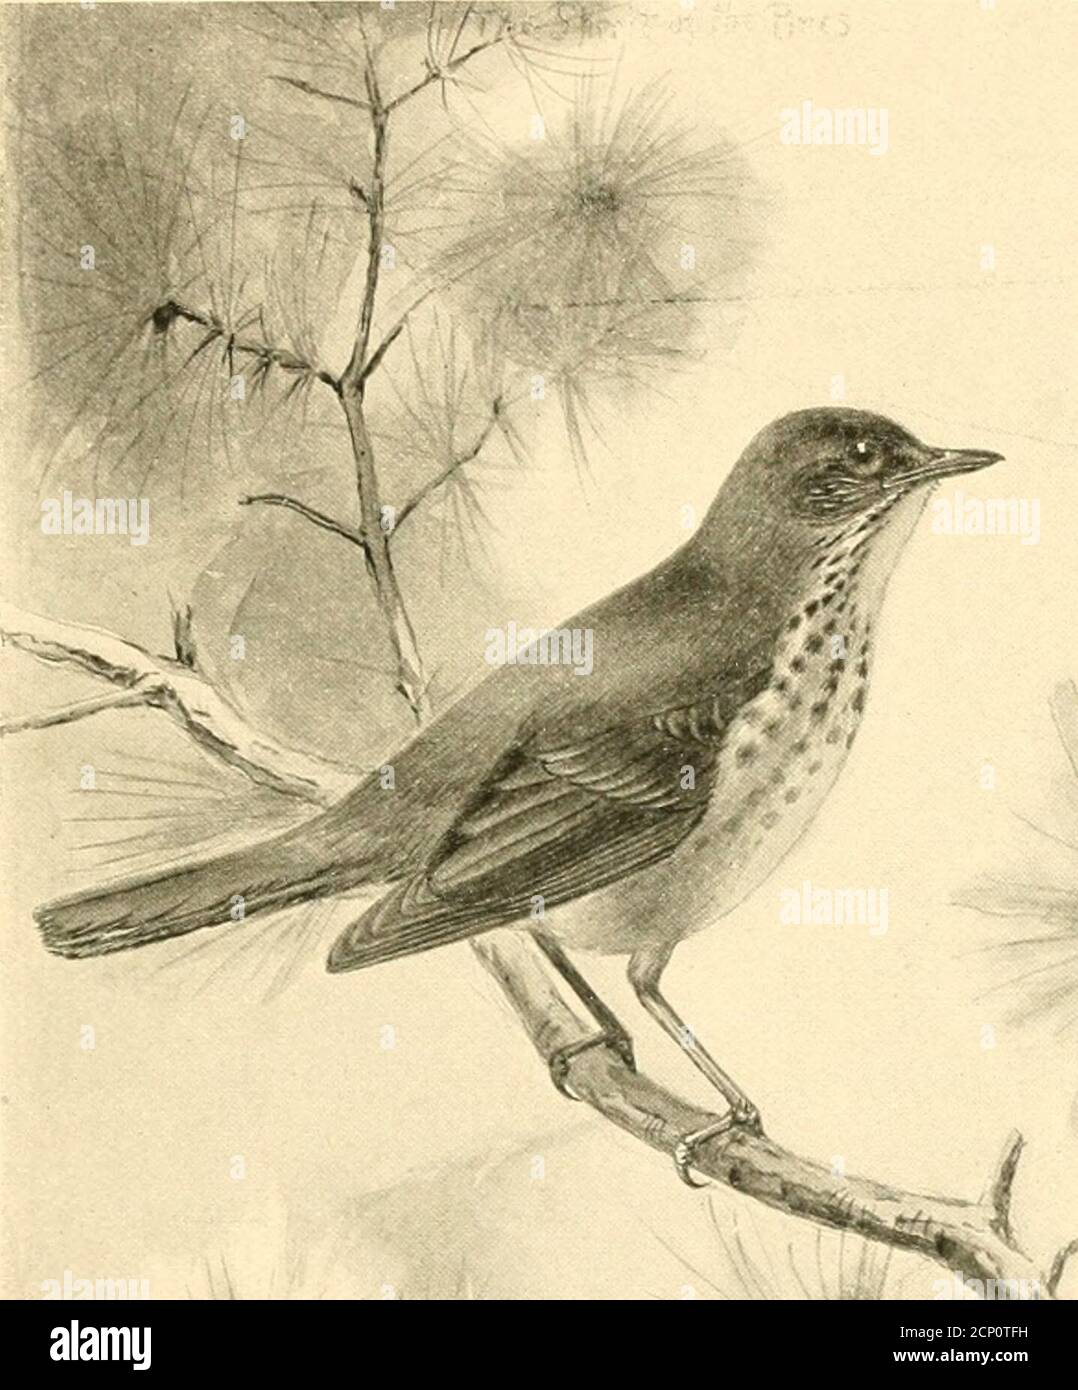 . Bird-life; a guide to the study of our common birds . r between April 5 and May 10, and in the fall wesee it from October 15 to November 25, while occasion-ally it may winter. During its migrations the Hermit Thrush usually fre-quents woodlands, where it may often be seen on or nearthe ground. Like the Yeery, it is a ground-nester, andits eggs, though slightly lighter in color, resemble thoseof the Veery and Wood Thrush in being jDlain, bluishgreen. When alighting, the Hermit has a characteristichabit of gently raising and lowering its tail, and at thesame time uttering a low c/nu-L Sometime Stock Photo